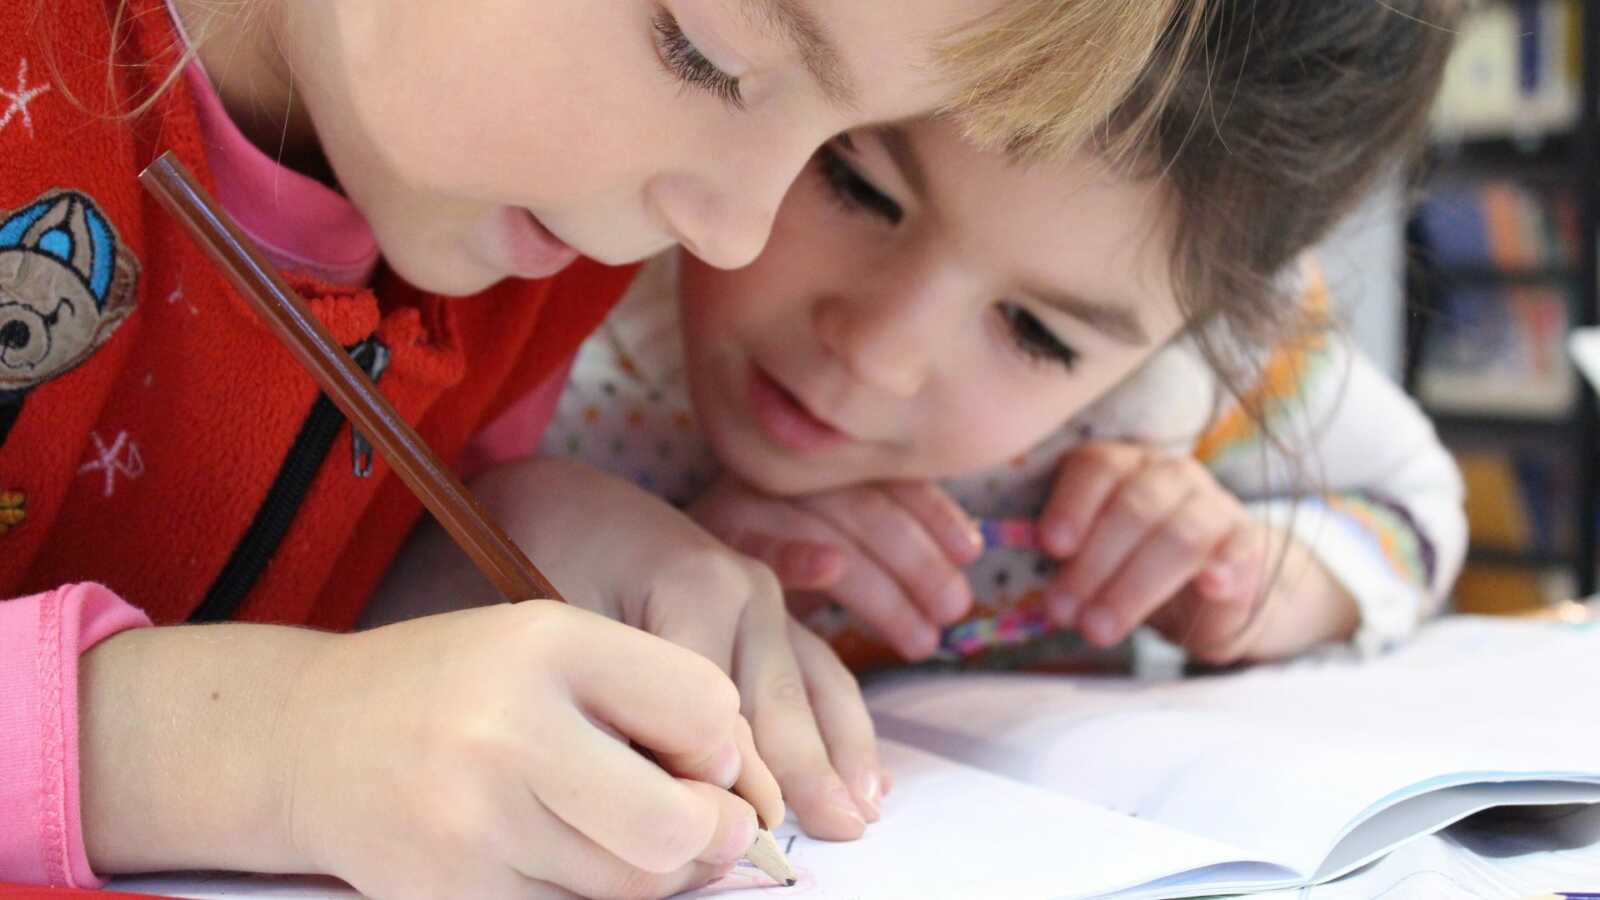 One child writing on a piece of paper and another is closely watching